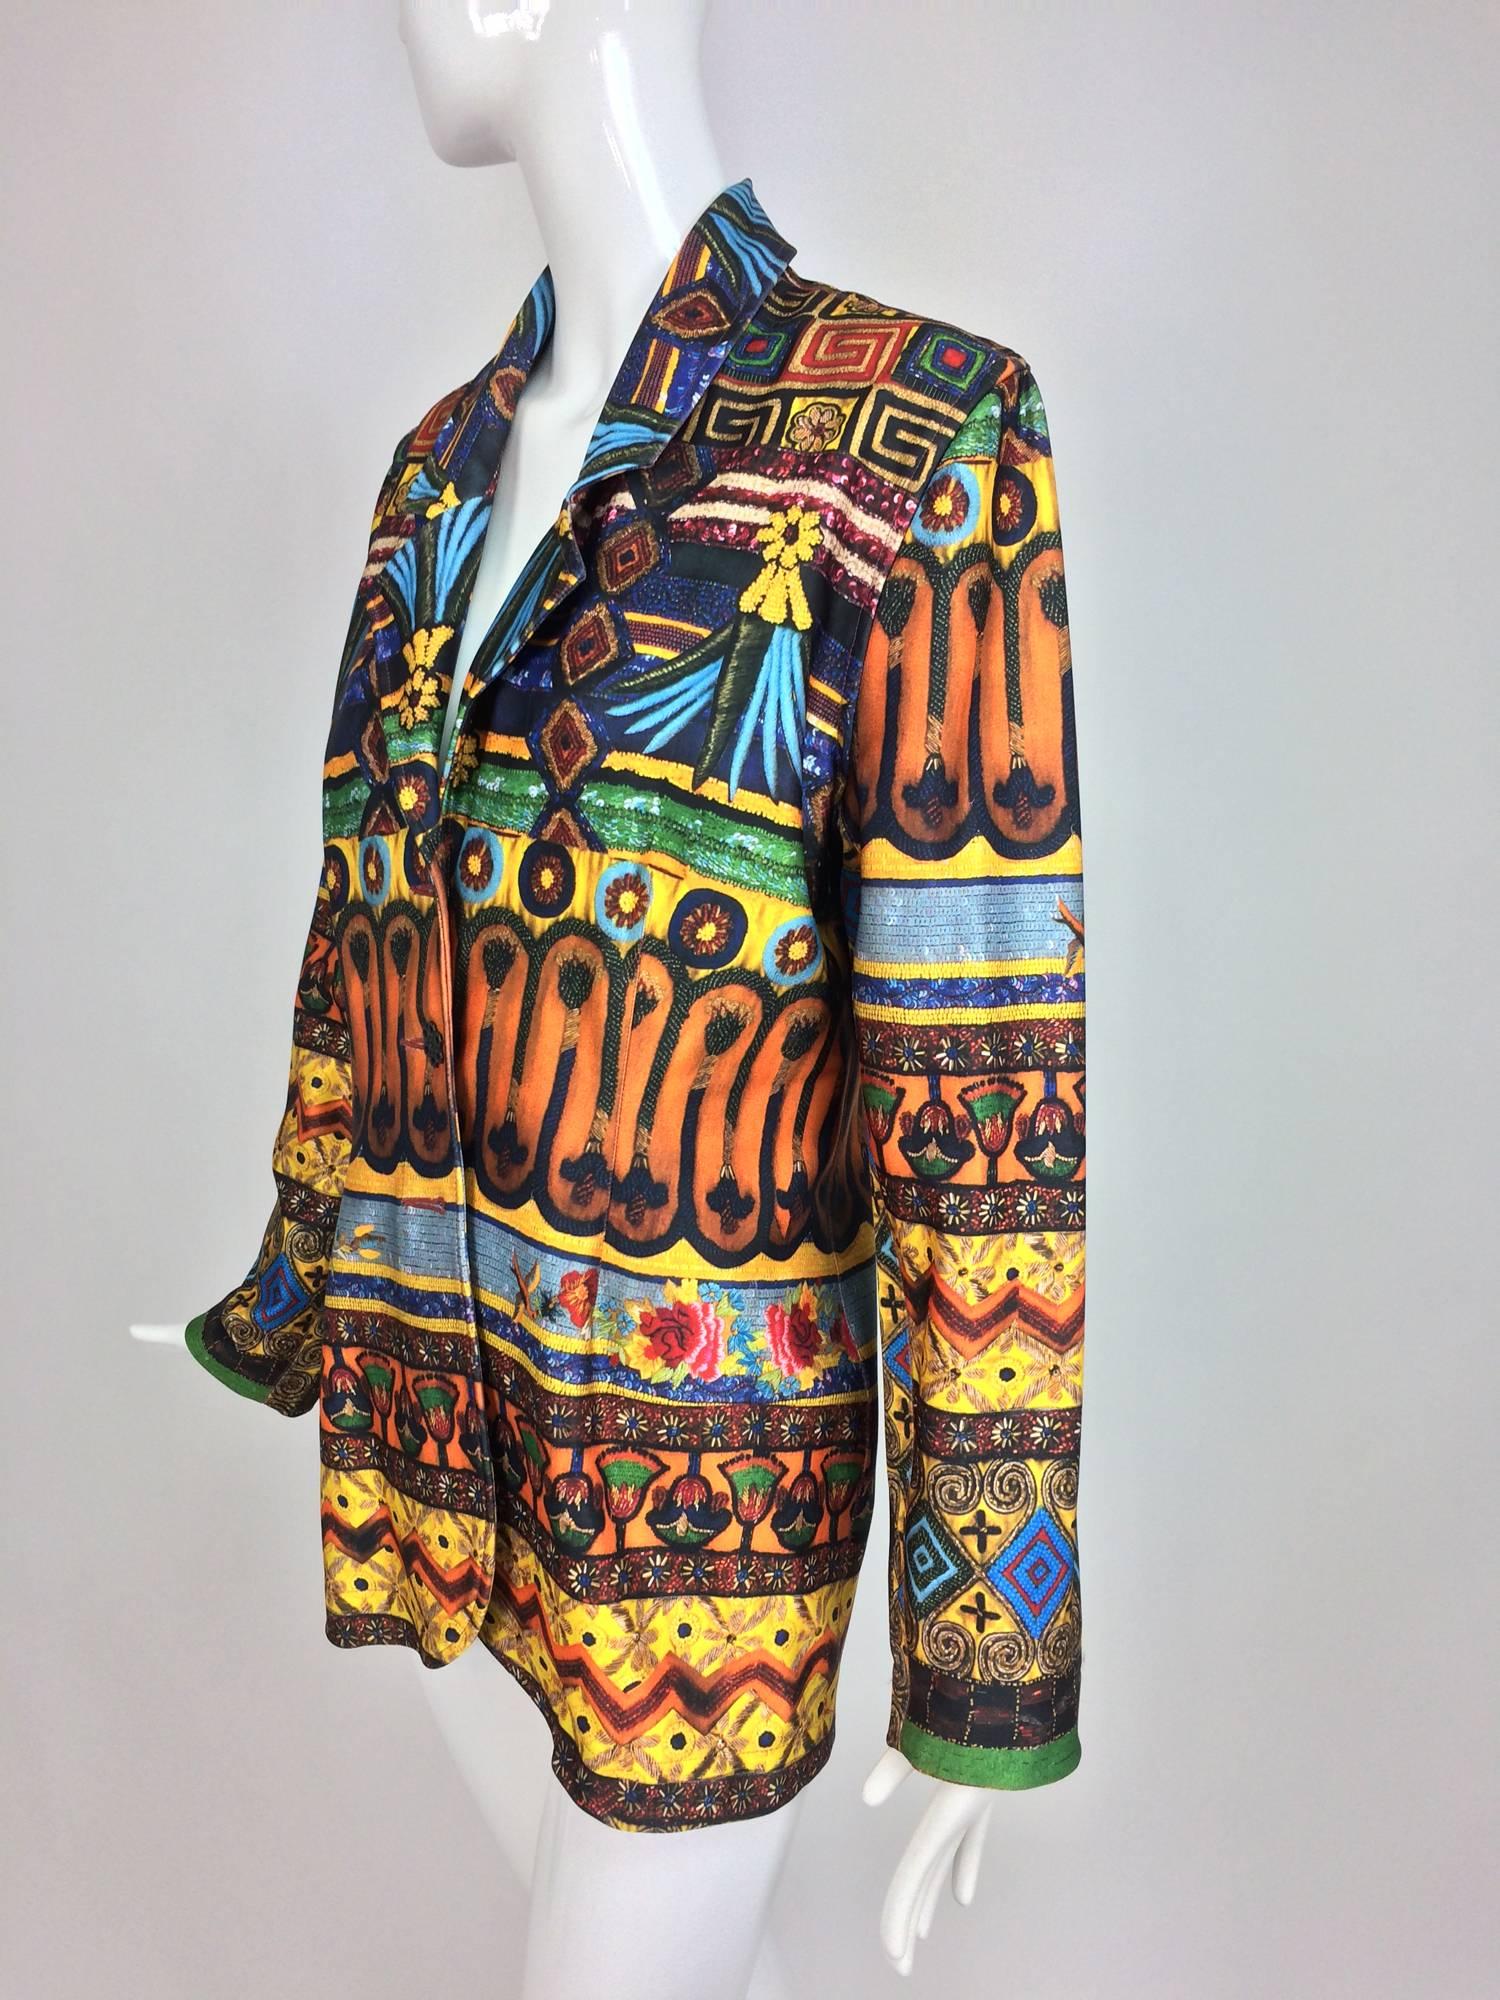 Vintage Todd Oldham Nile Mix print blazer hip length S/S 1994...Jewel bright print done in a modern, for the time, polyester/Lycra blend...Single breasted fitted jacket with long sleeves and notched collar lapels...Fabric has a bit of stretch...It's